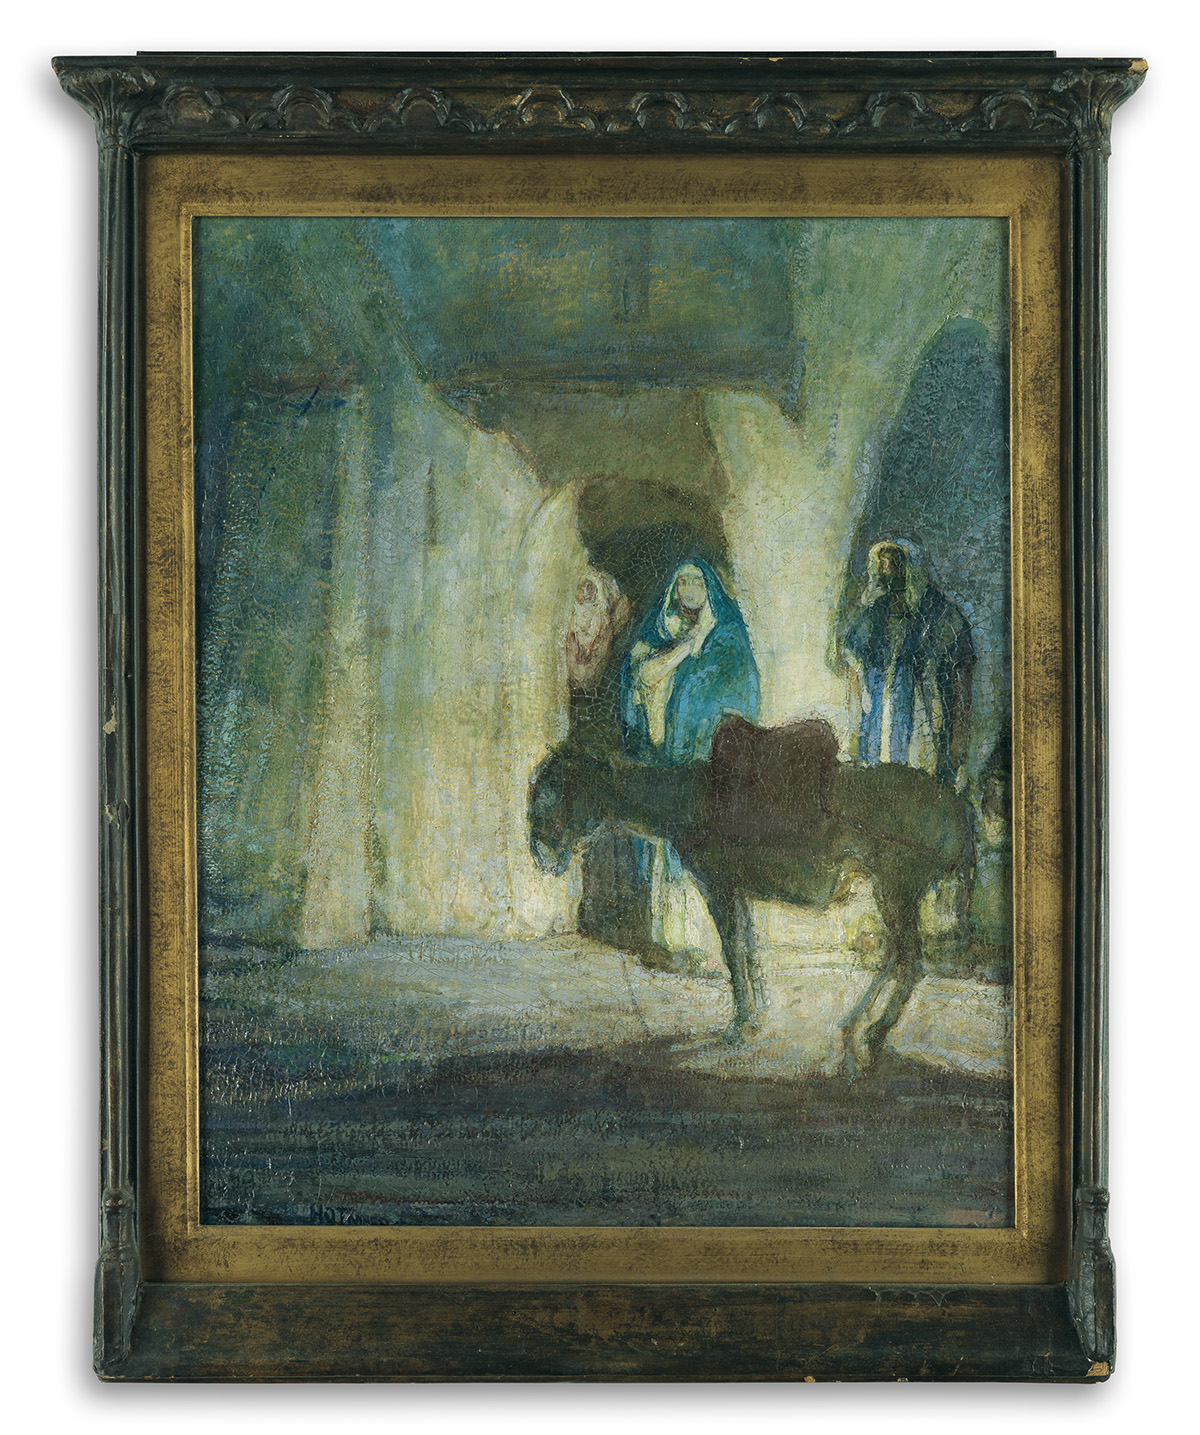 HENRY OSSAWA TANNER (1859 - 1937) At the Gates (Flight into Egypt).